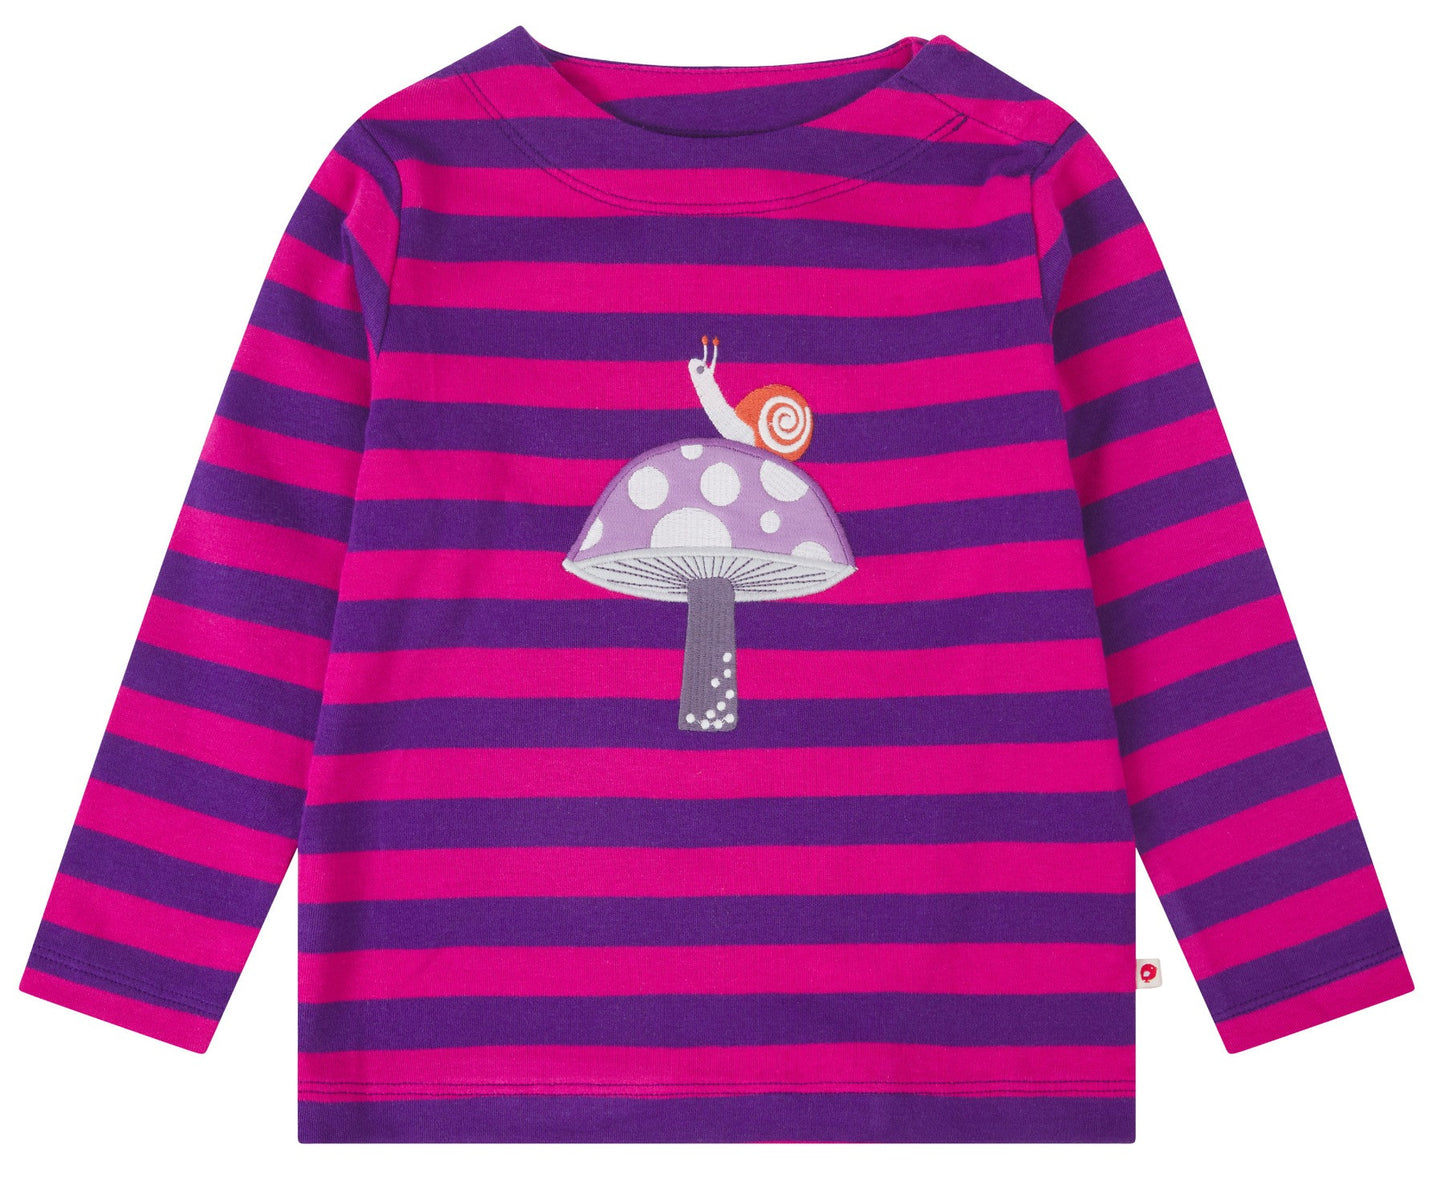 Long Sleeved Striped Top - Toadstool